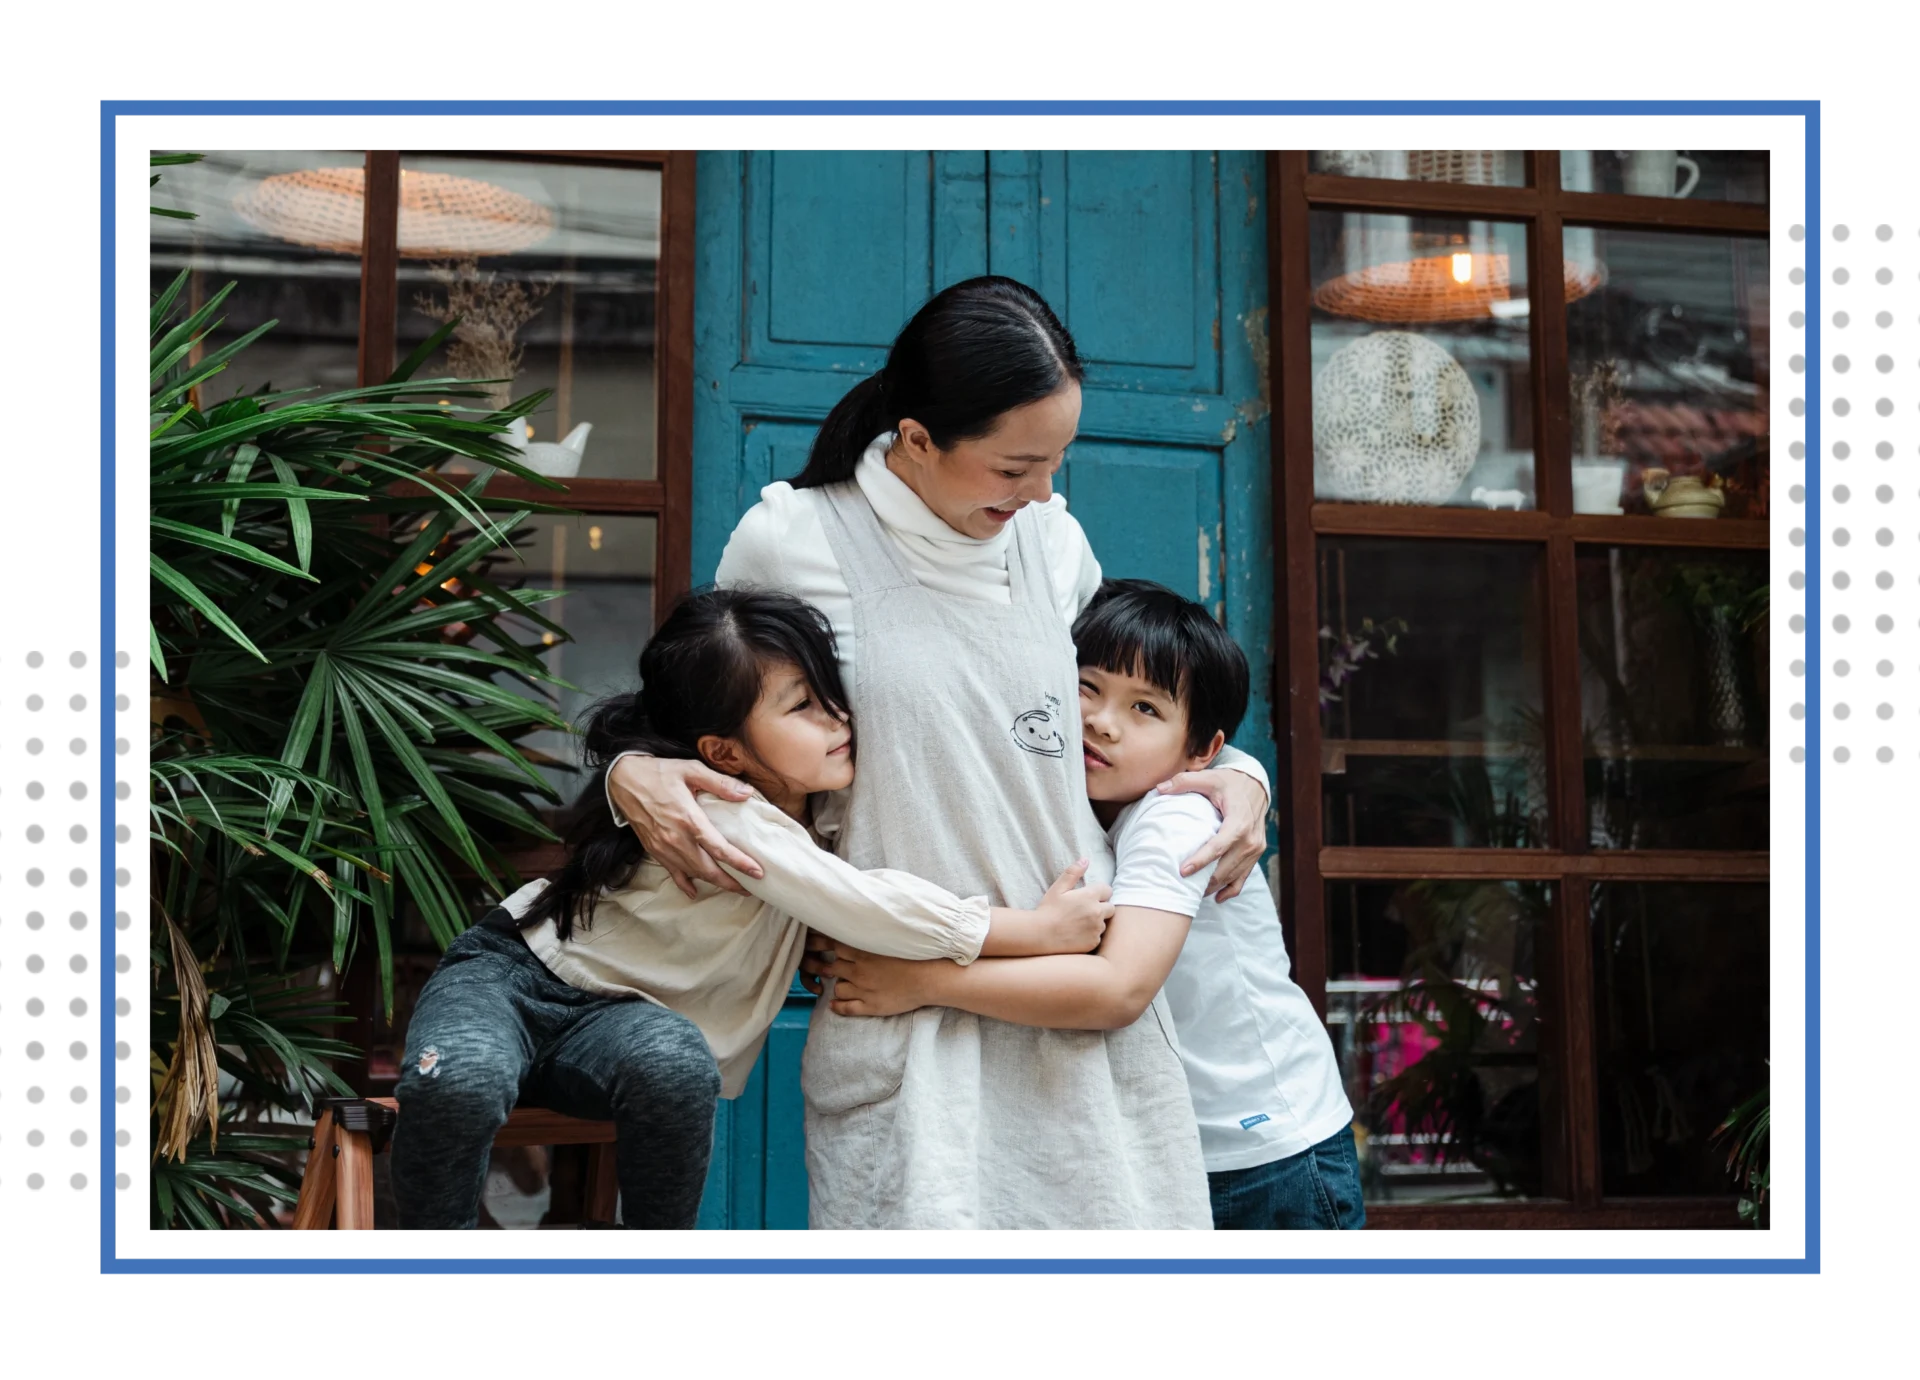 A woman and two children hug in front of a blue door.